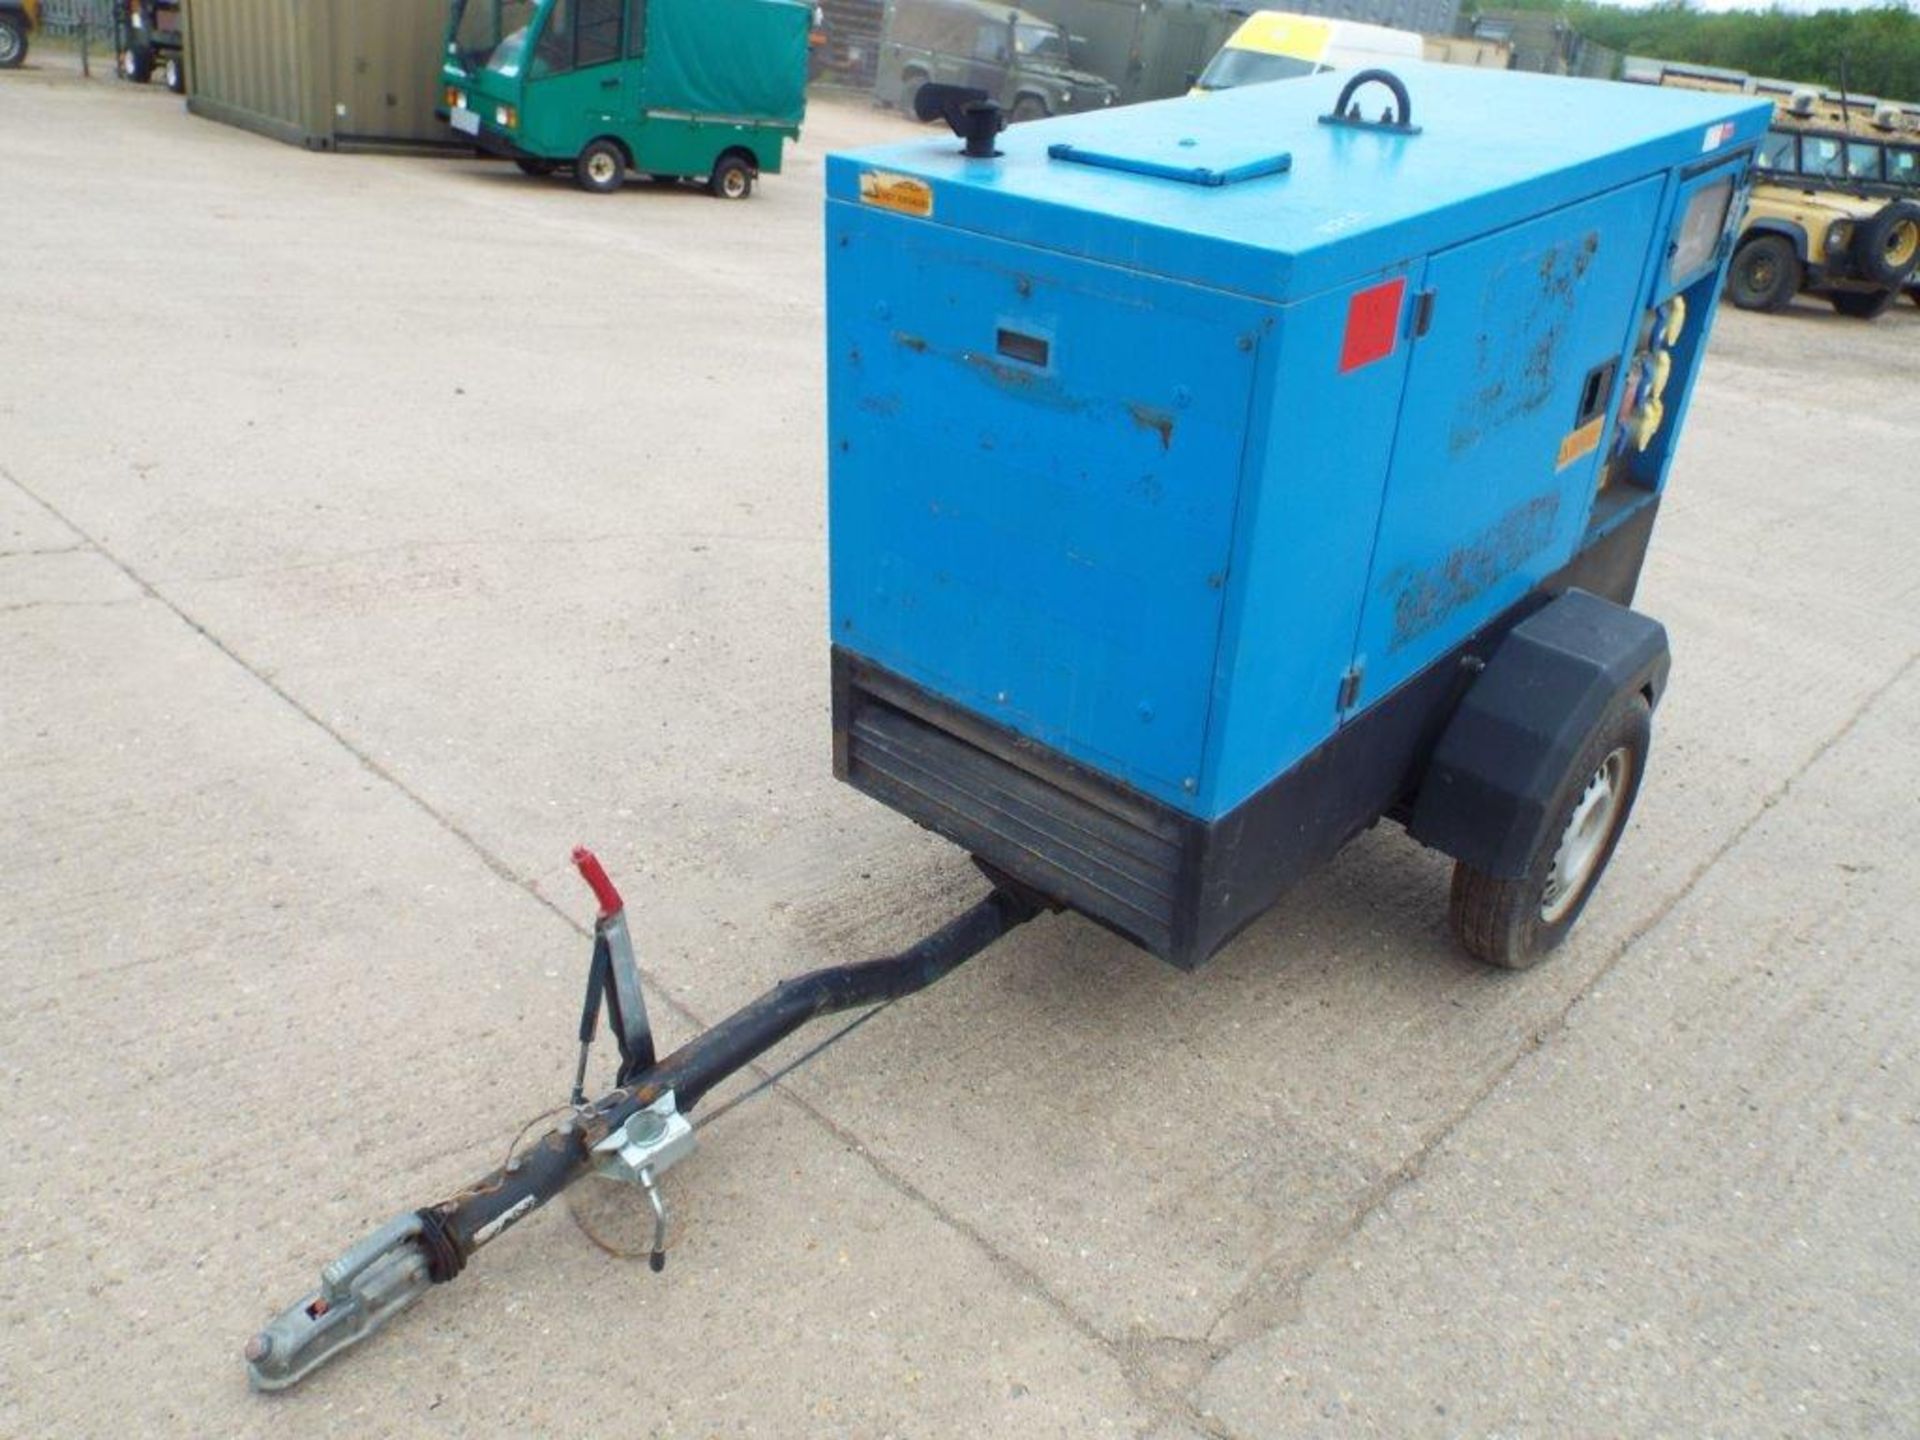 Stephill Generators Trailer Mounted 20 kVA 400V 3 Phase Diesel Generator ONLY 1,820 HOURS!